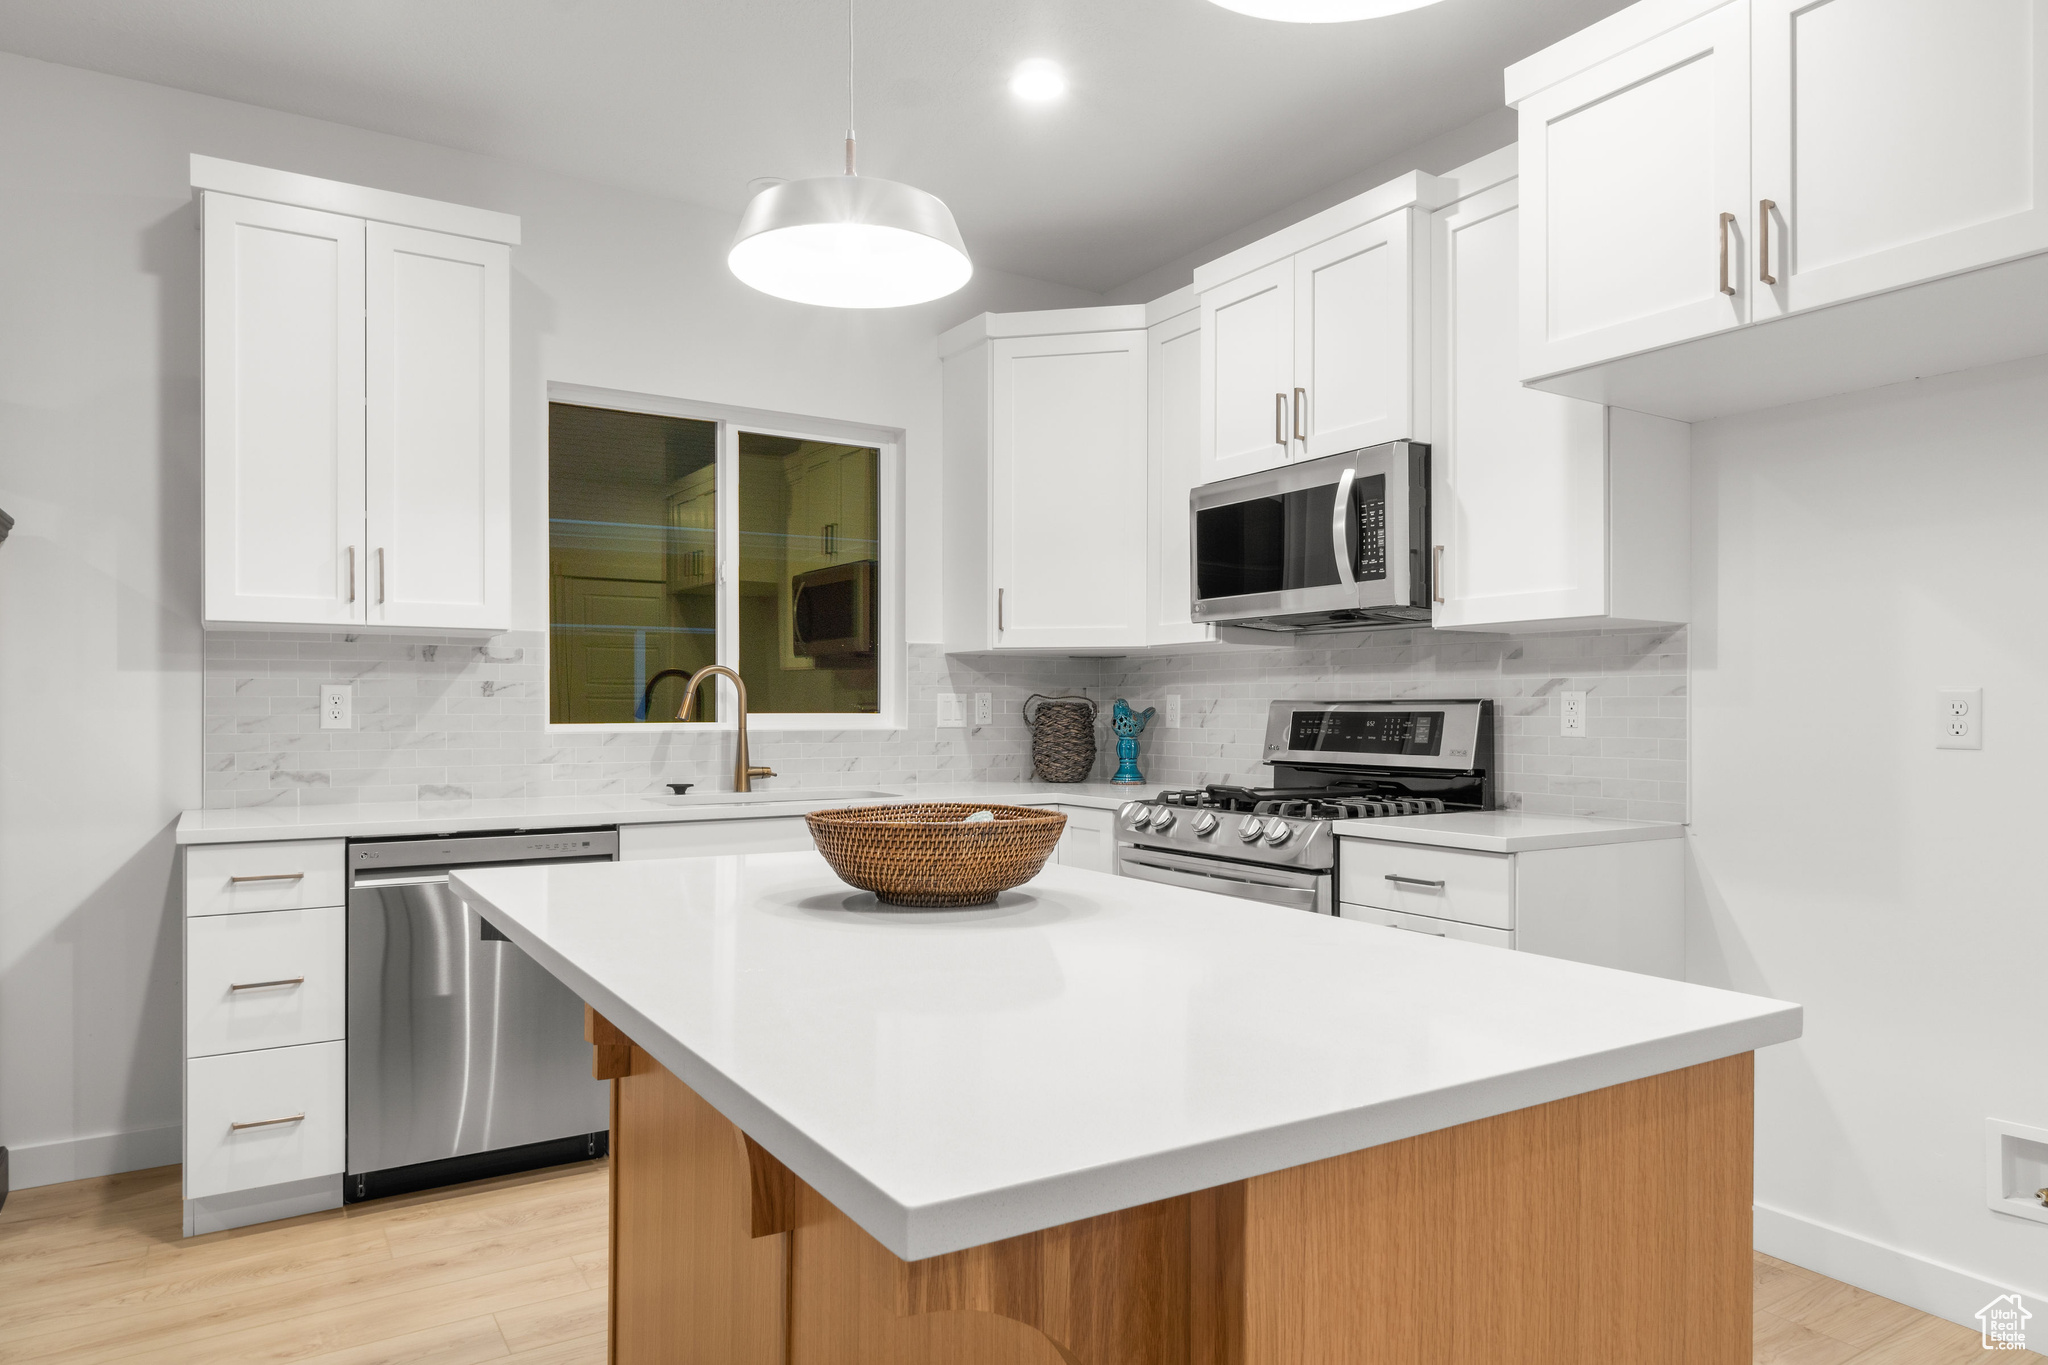 Kitchen featuring appliances with stainless steel finishes, a center island, backsplash, and white cabinetry